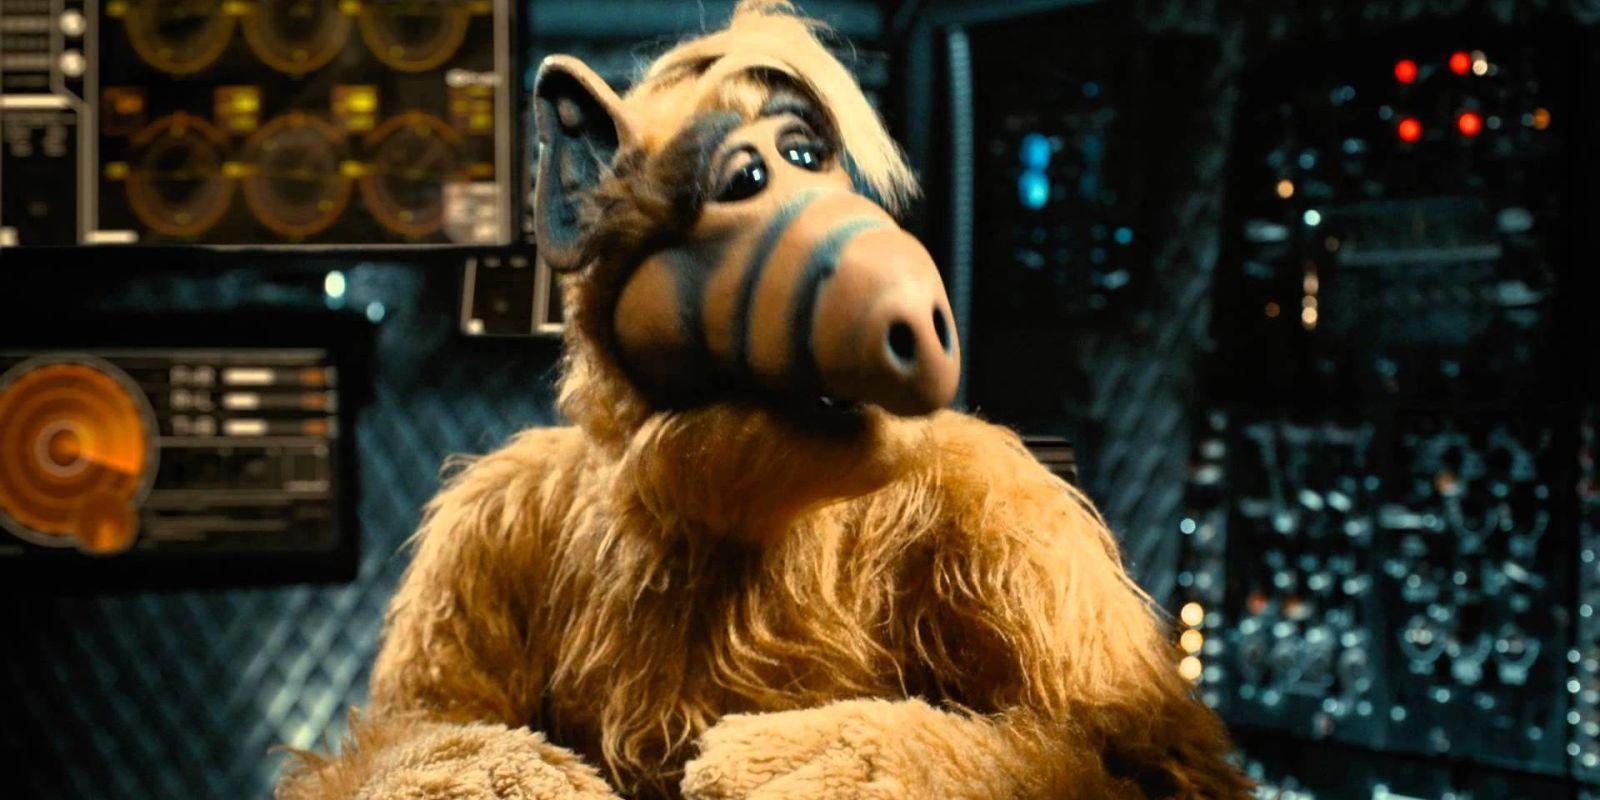 ALF is the latest '80s sitcom to get the reboot treatment